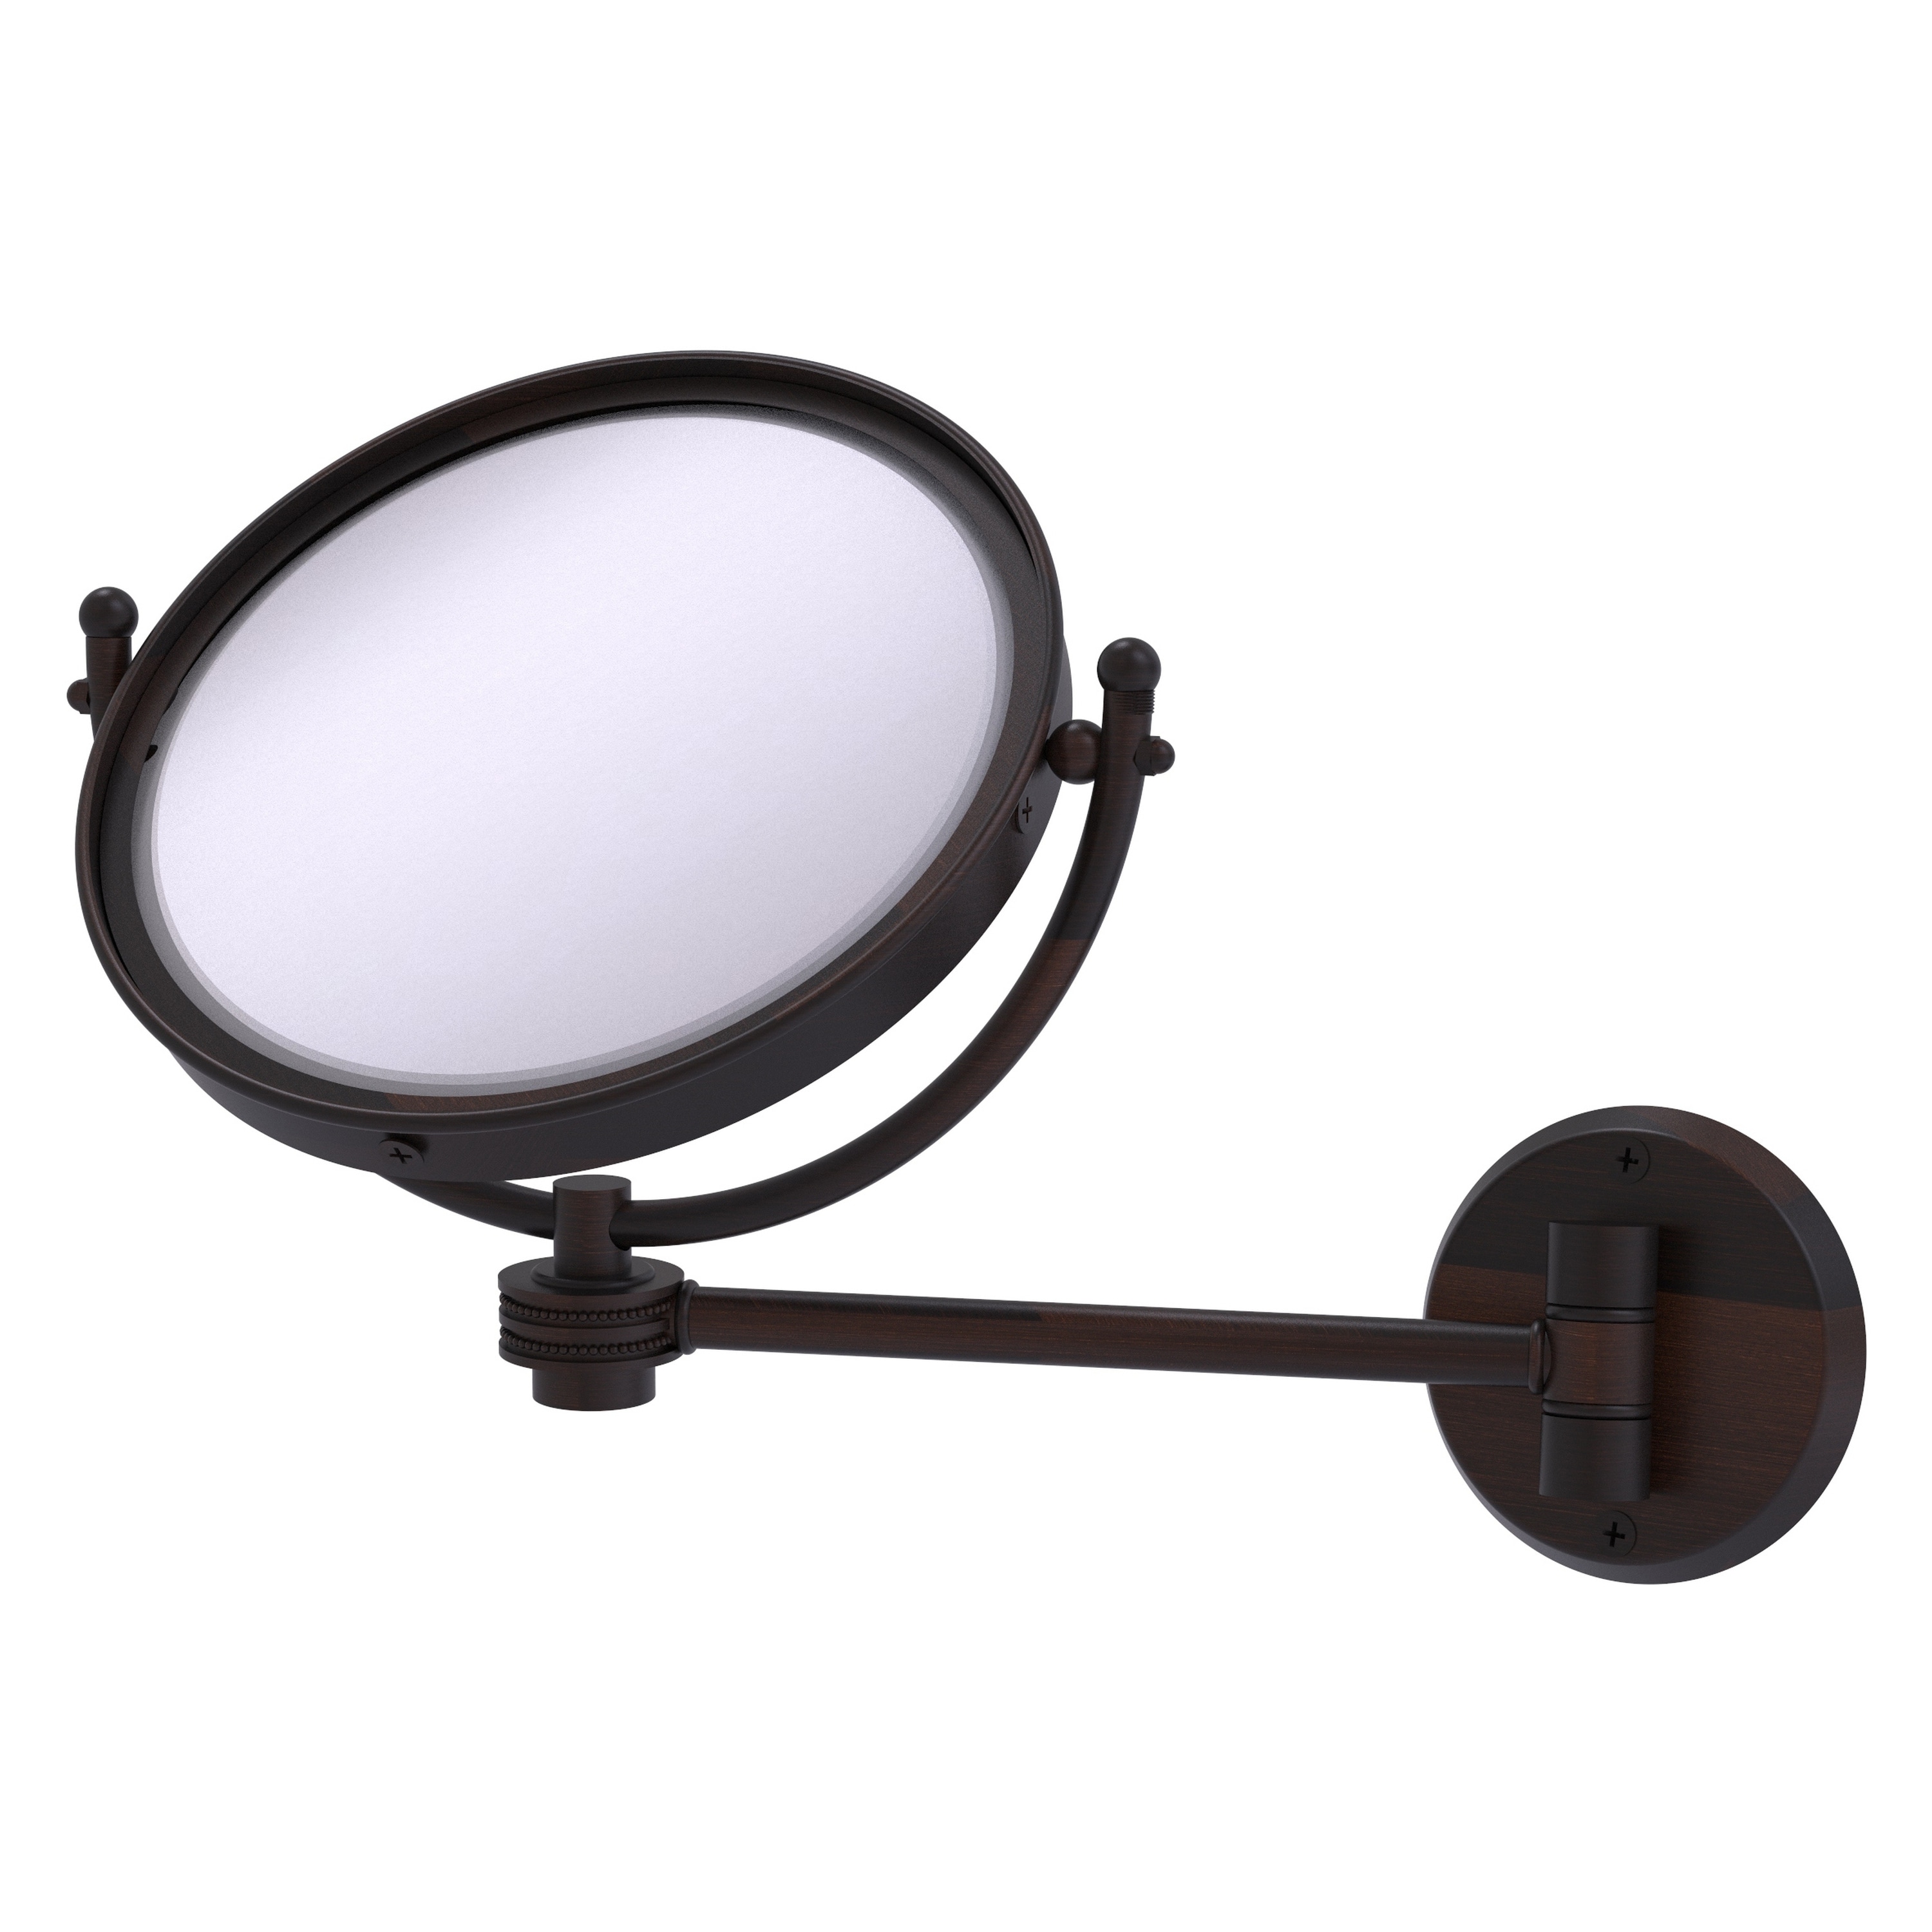 8-in x 10-in Distressed White Double-sided 5X Magnifying Wall-mounted Vanity Mirror | - Allied Brass WM-5D/5X-VB